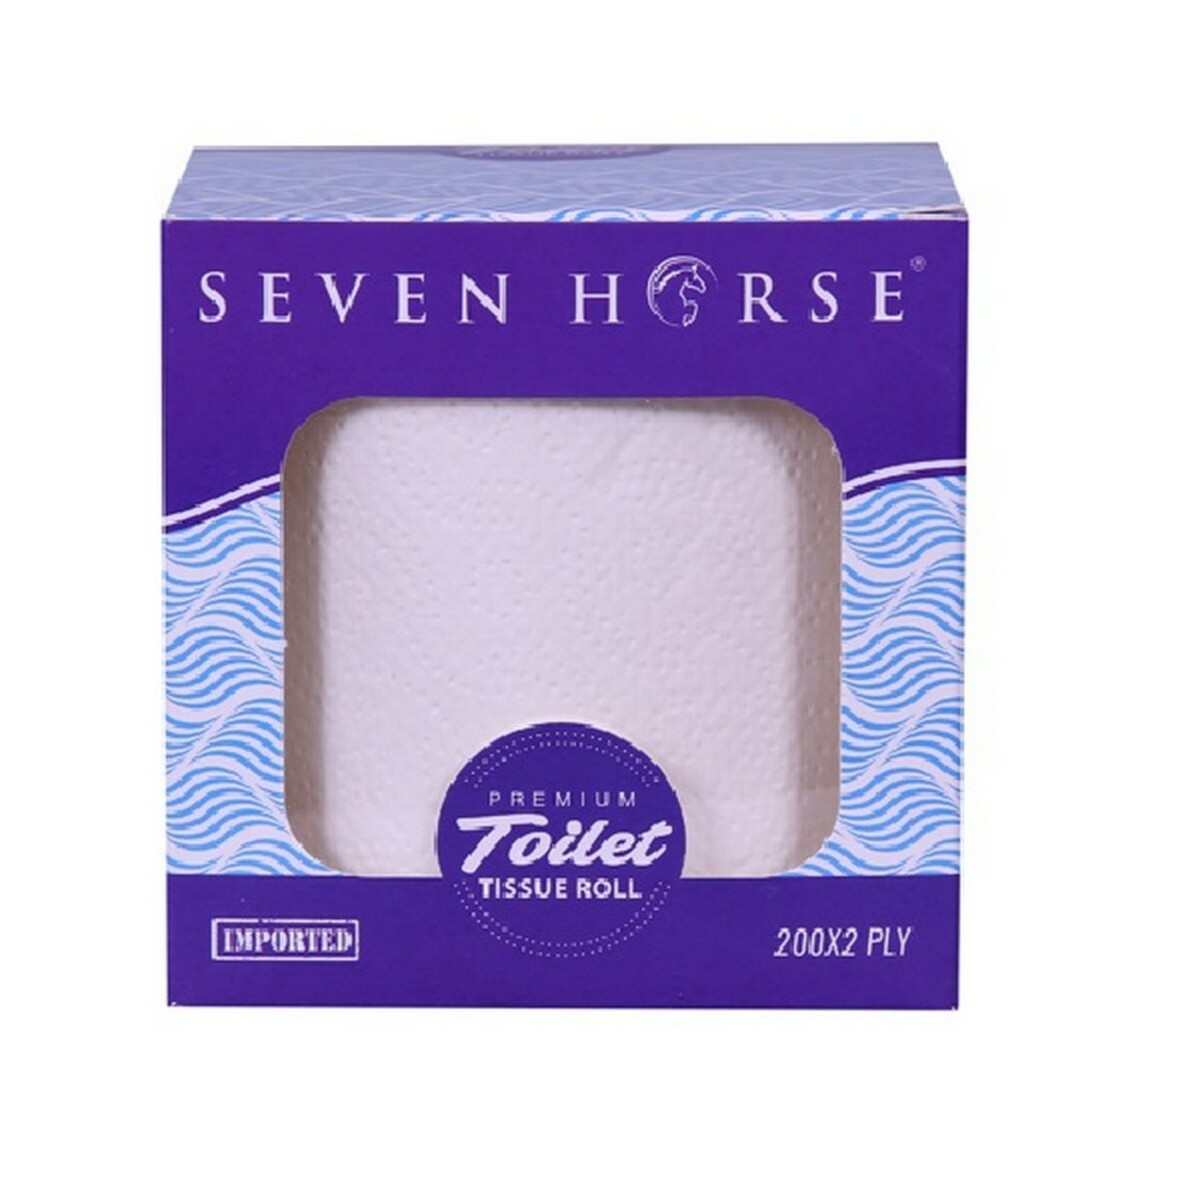 Seven Horse Toilet Roll 2 PLY 200's Single